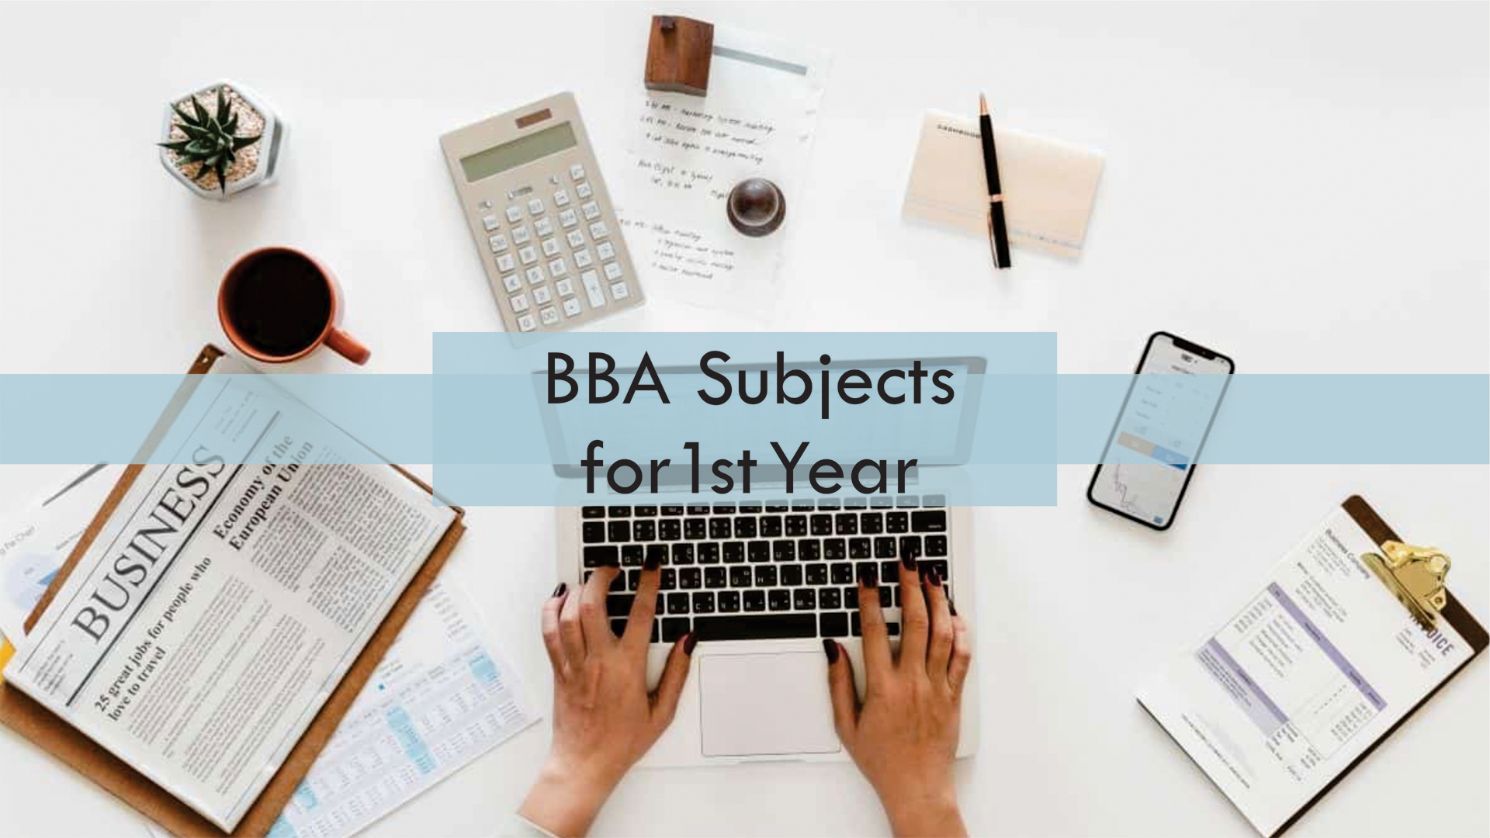 BBA Subjects for 1st Year